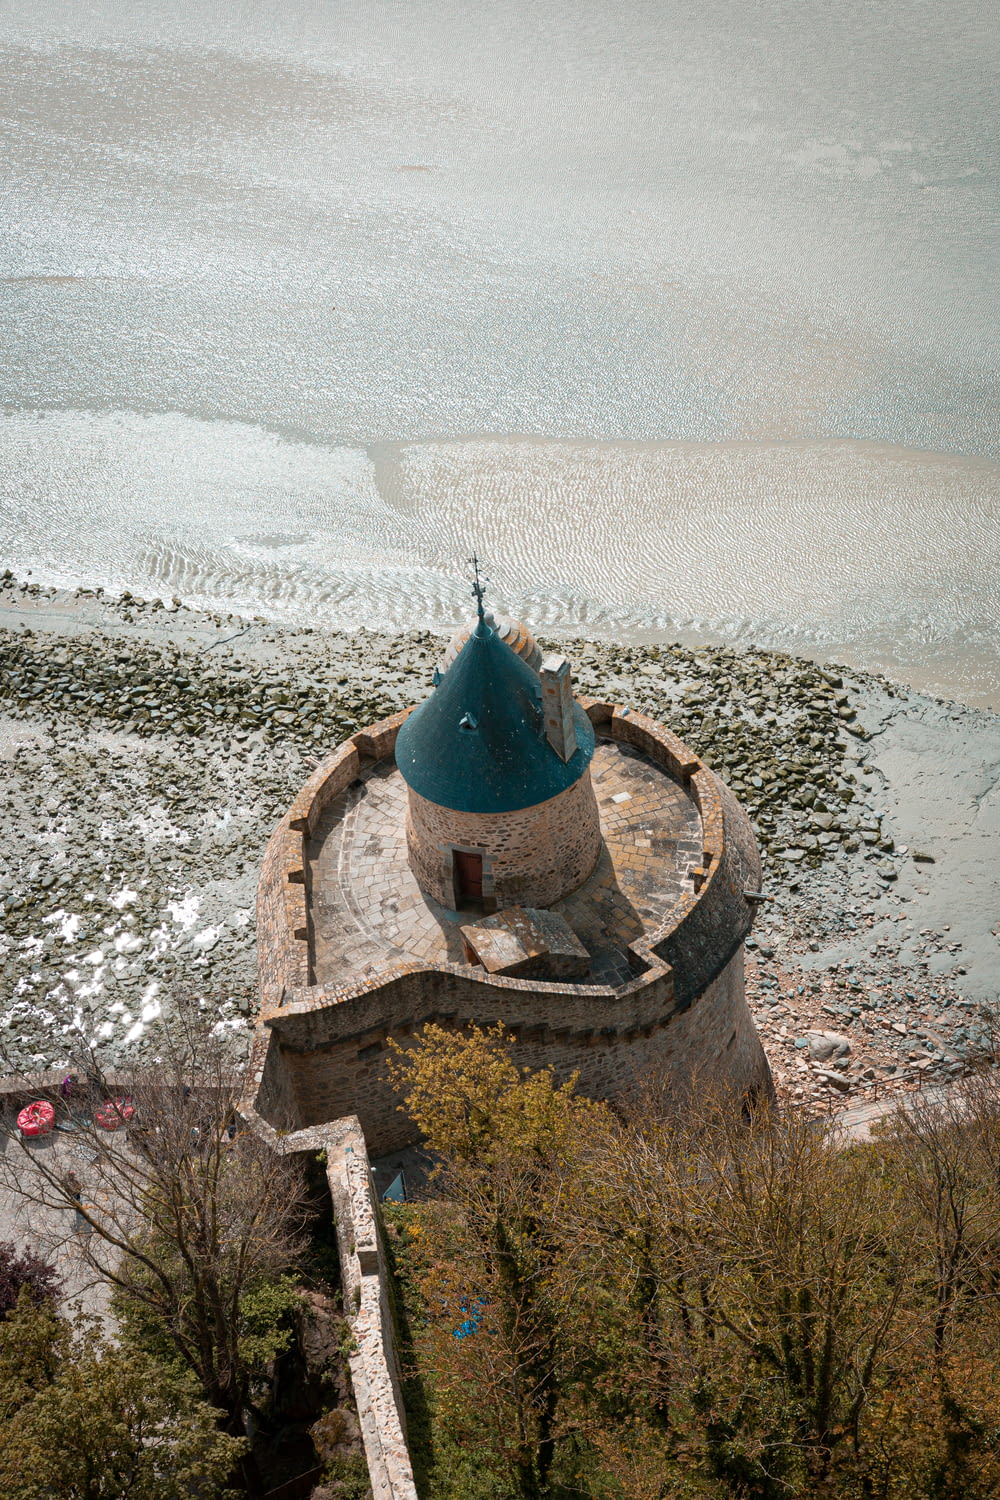 an aerial view of a tower on a beach